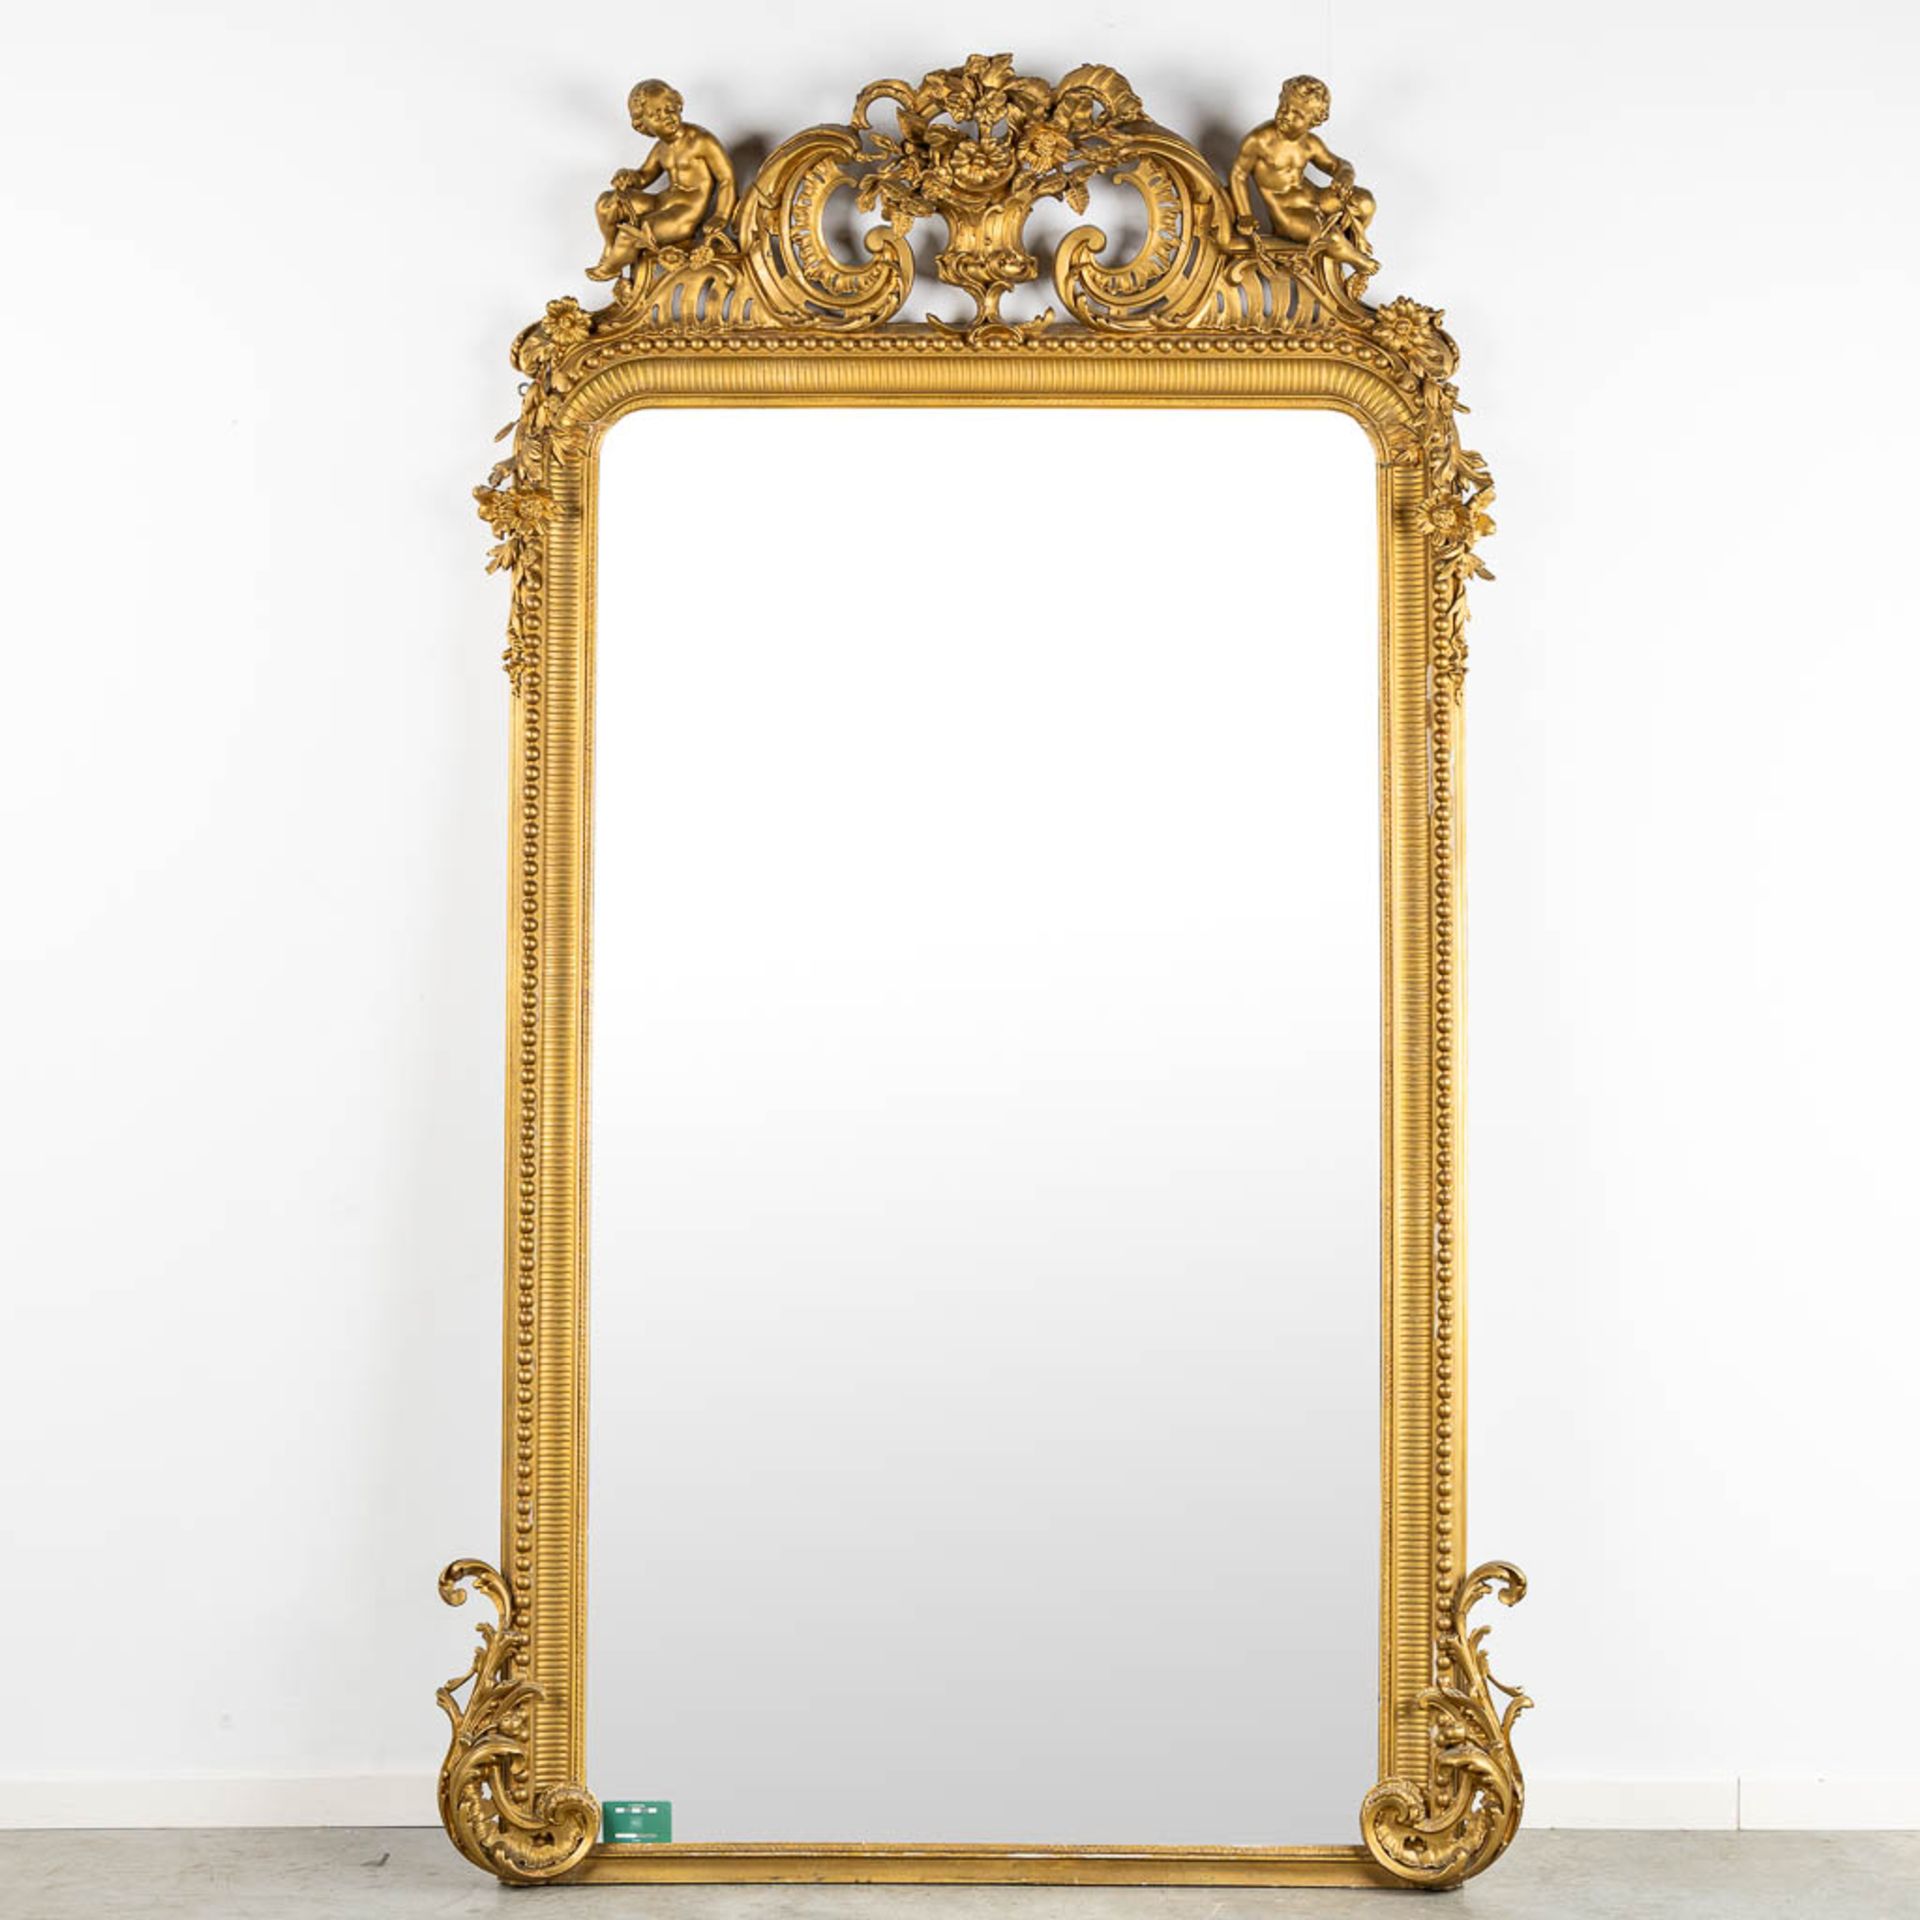 An antique and large mirror, decorated with putti in Louis XV style. Circa 1900. (W:130 x H:225 cm) - Image 2 of 11